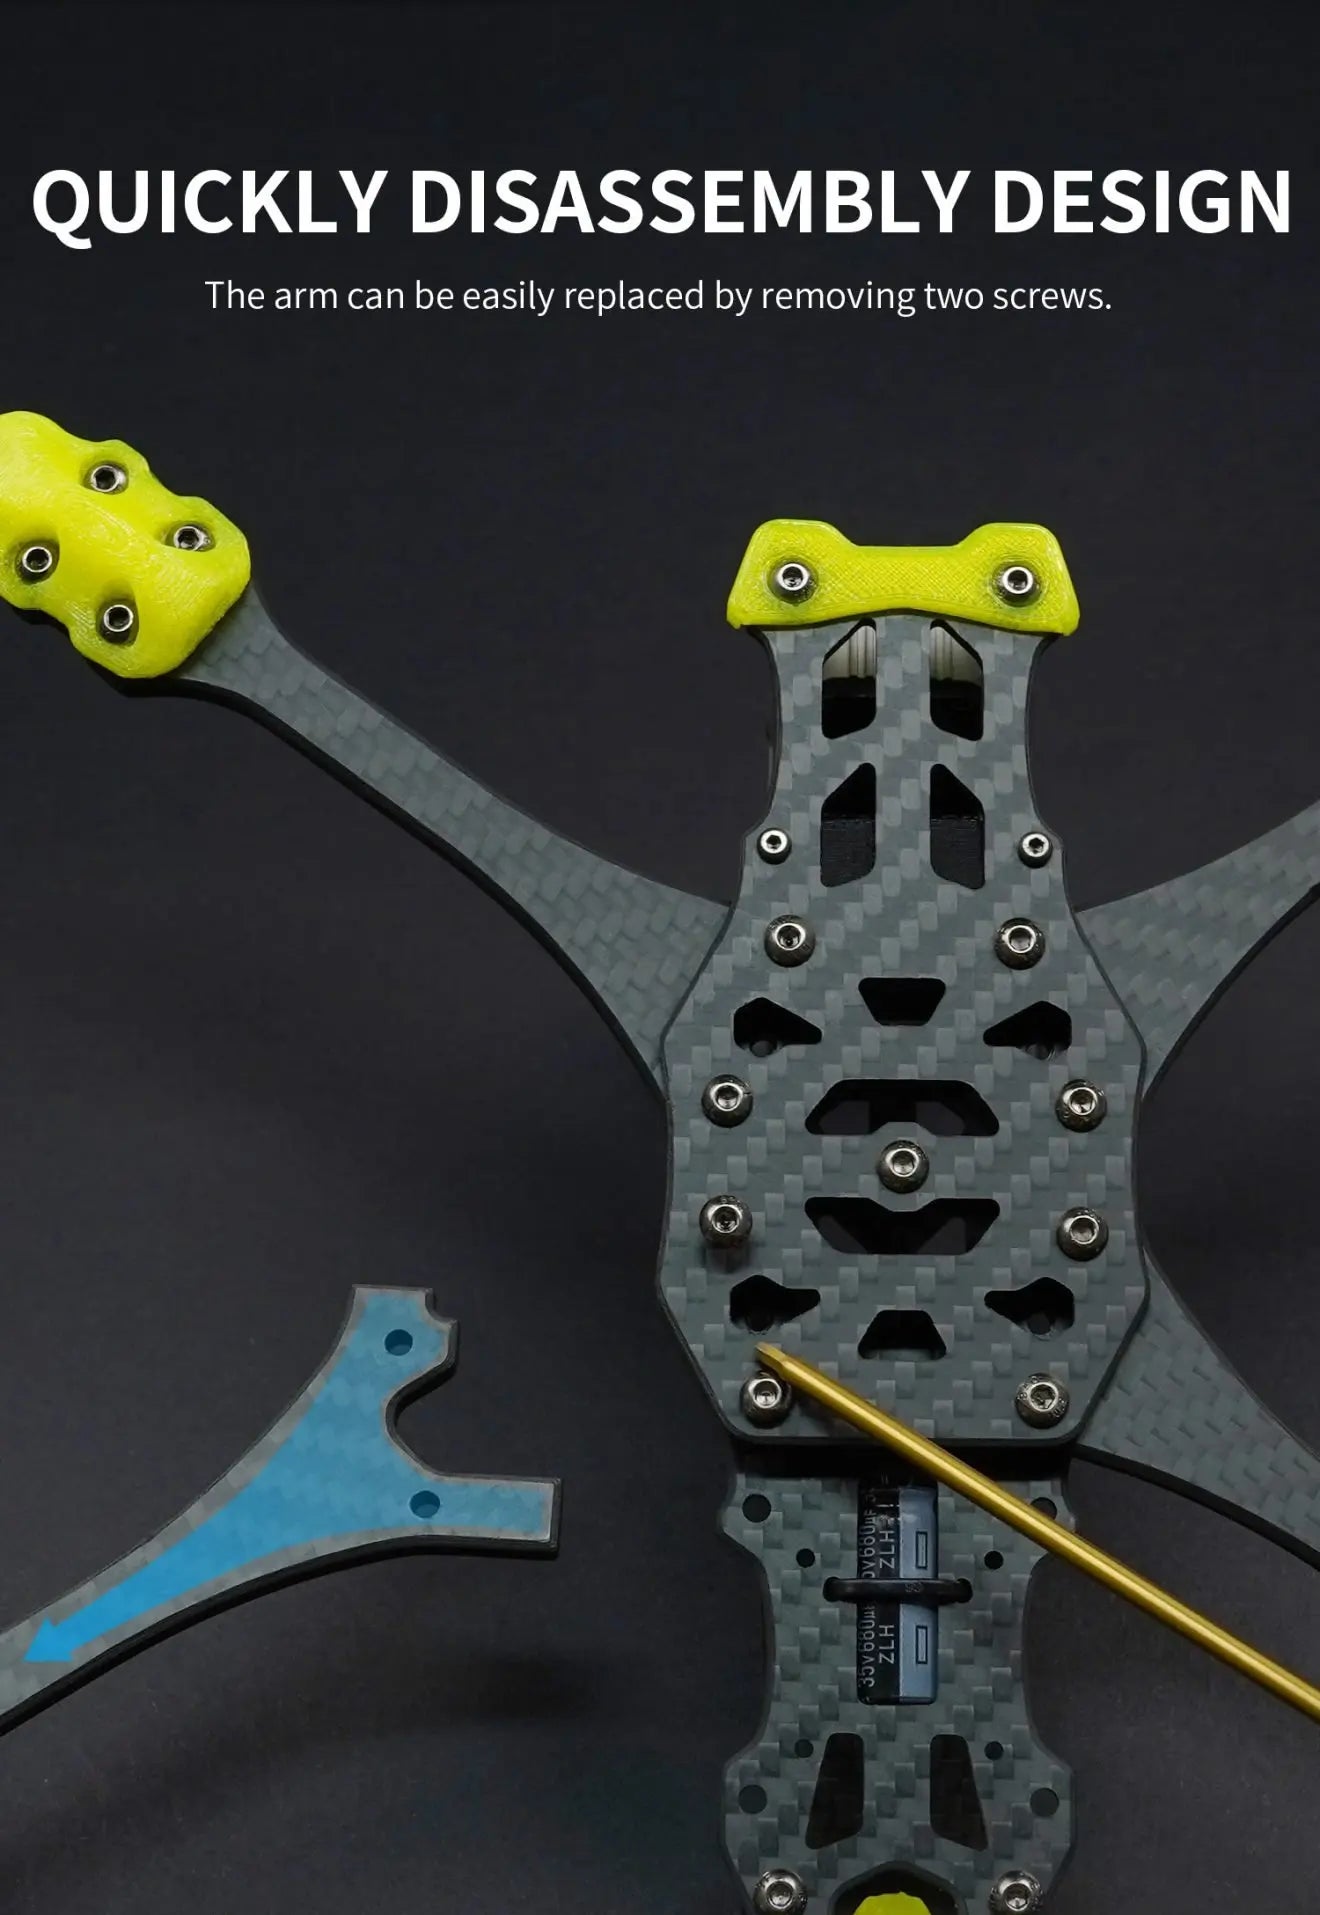 MARK5 HD AVATAR Freestyle FPV Drone, QUICKLY DISASSEMBLY DESIGN The arm can be easily replaced by 